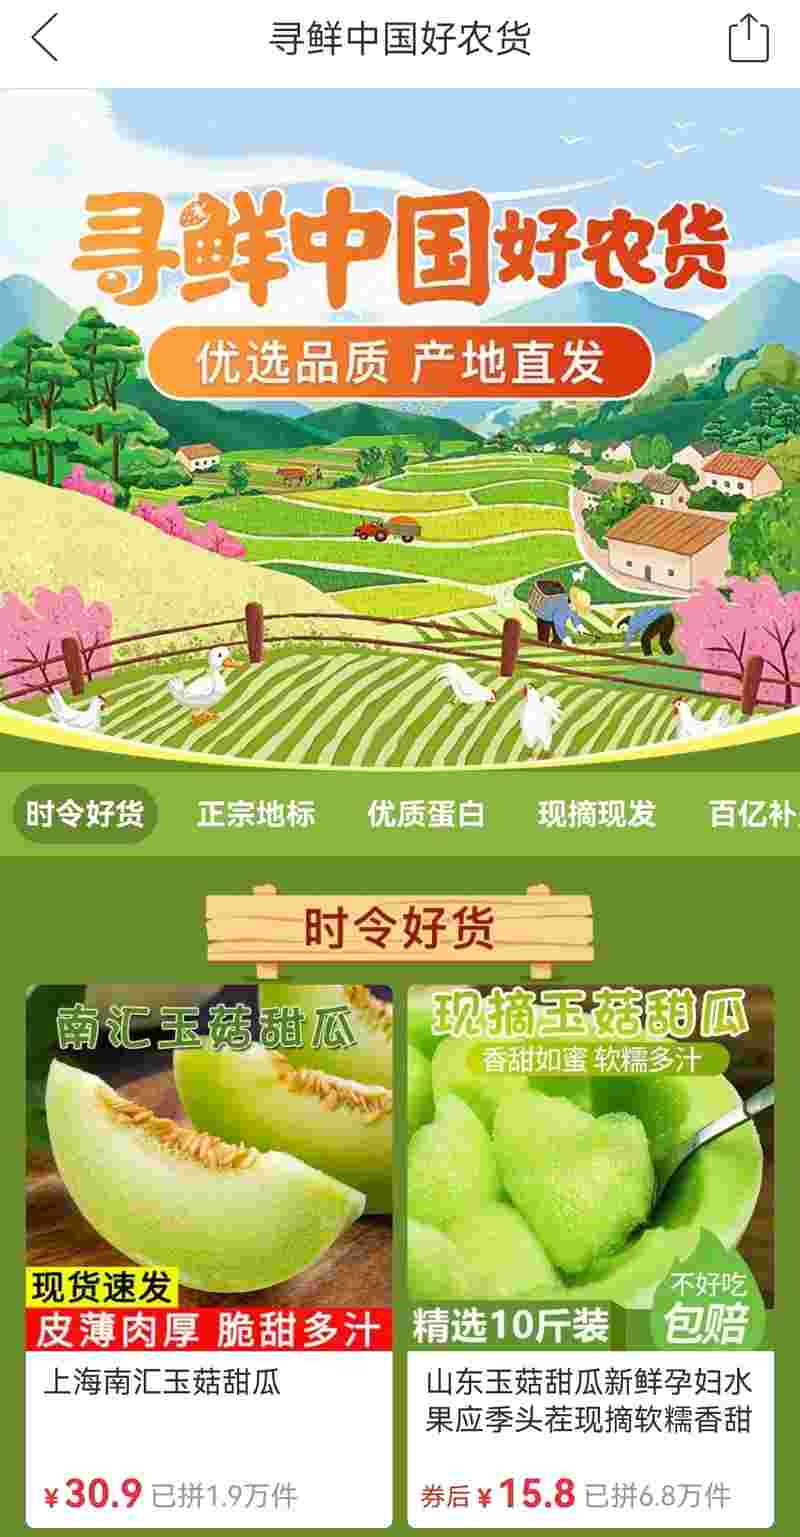 Pinduoduo Helps Yugu Transform into a "Rich Melon", Directly Arriving at Taste buds Shanghai from Tiantou | E-commerce | Yugu